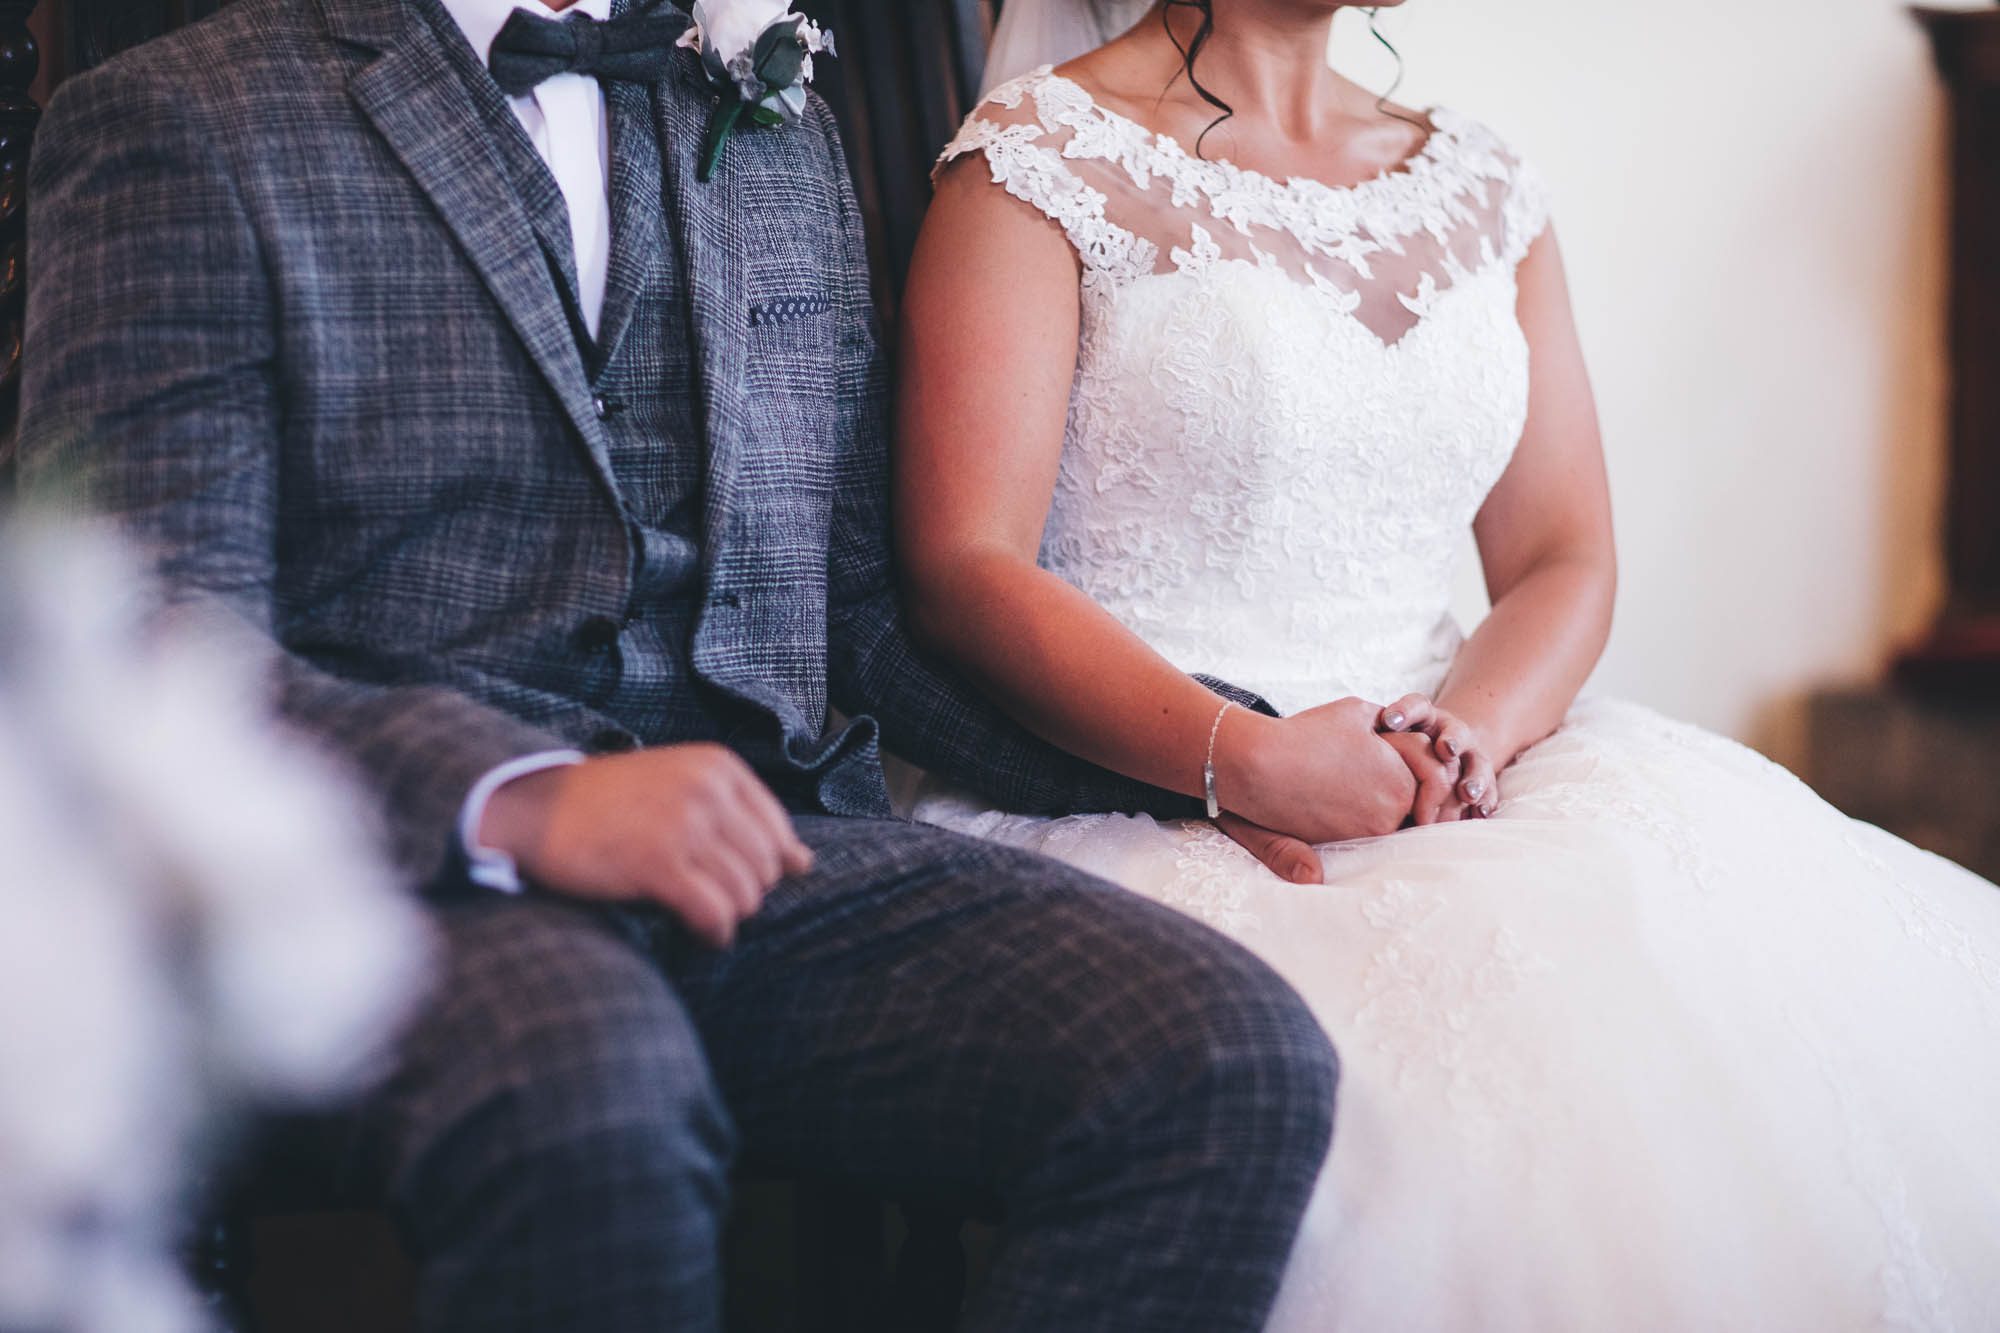 Close up shot of Bride and Groom sat down holding hands at wedding ceremony